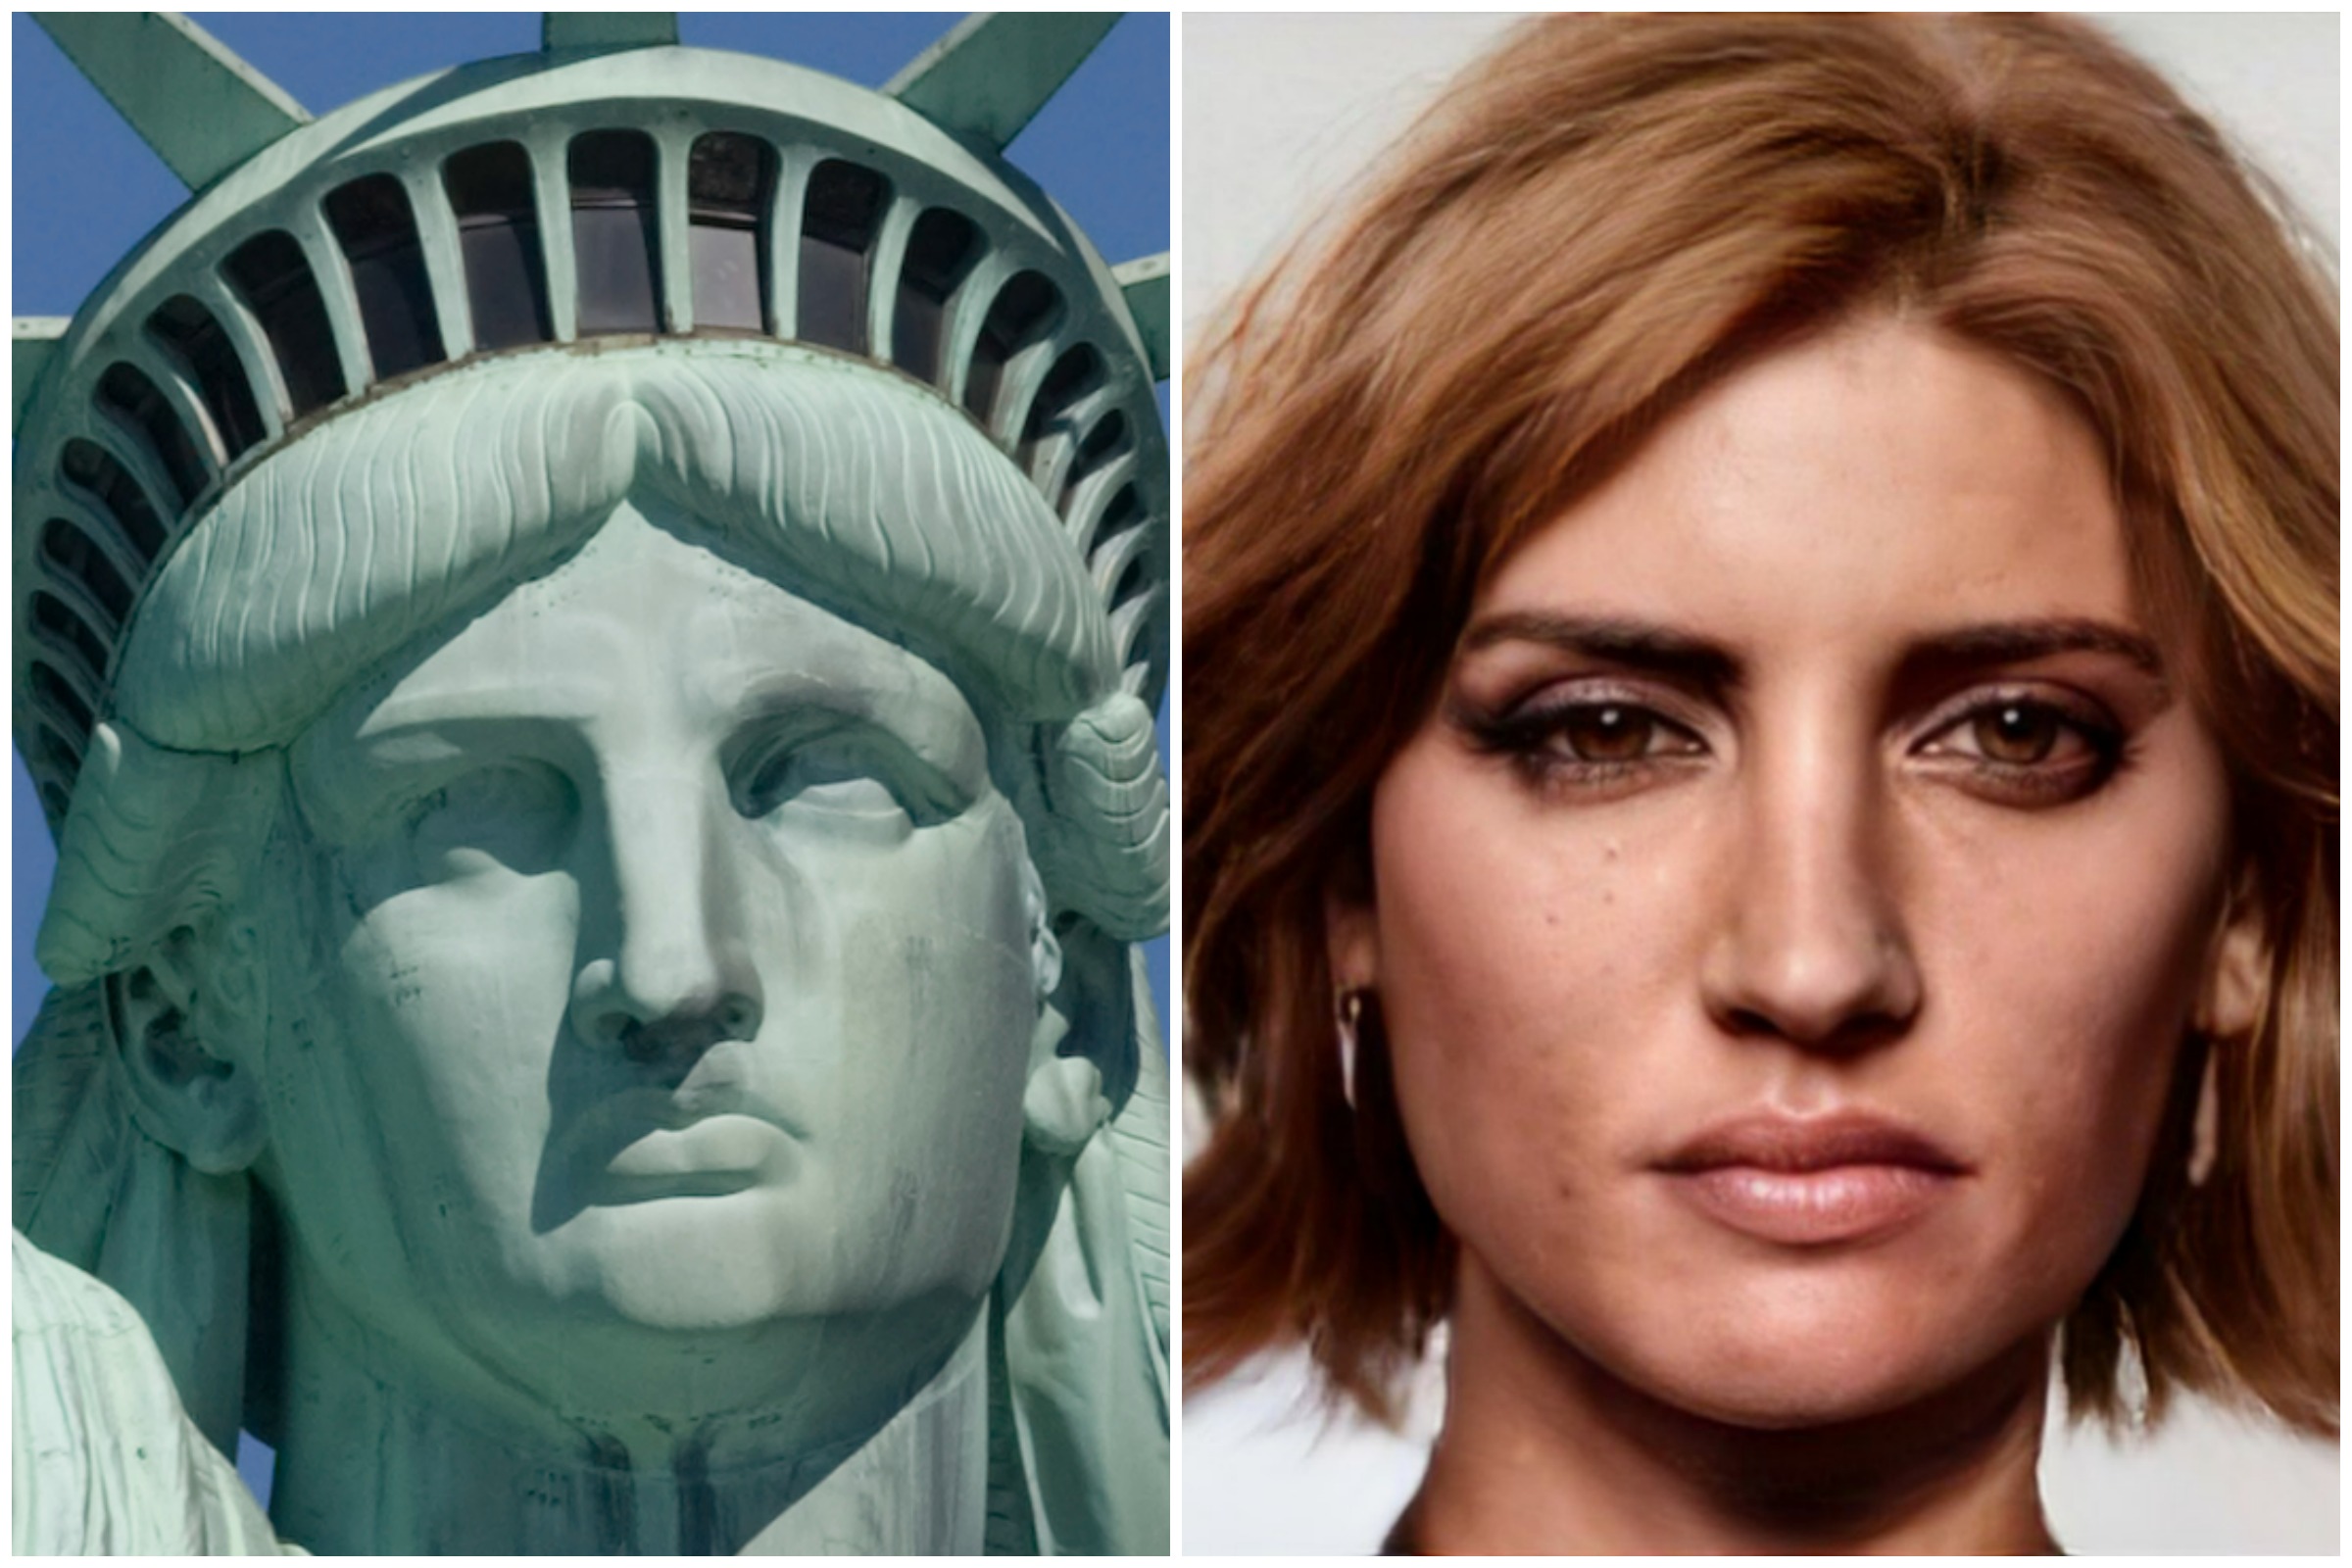 statue of liberty face